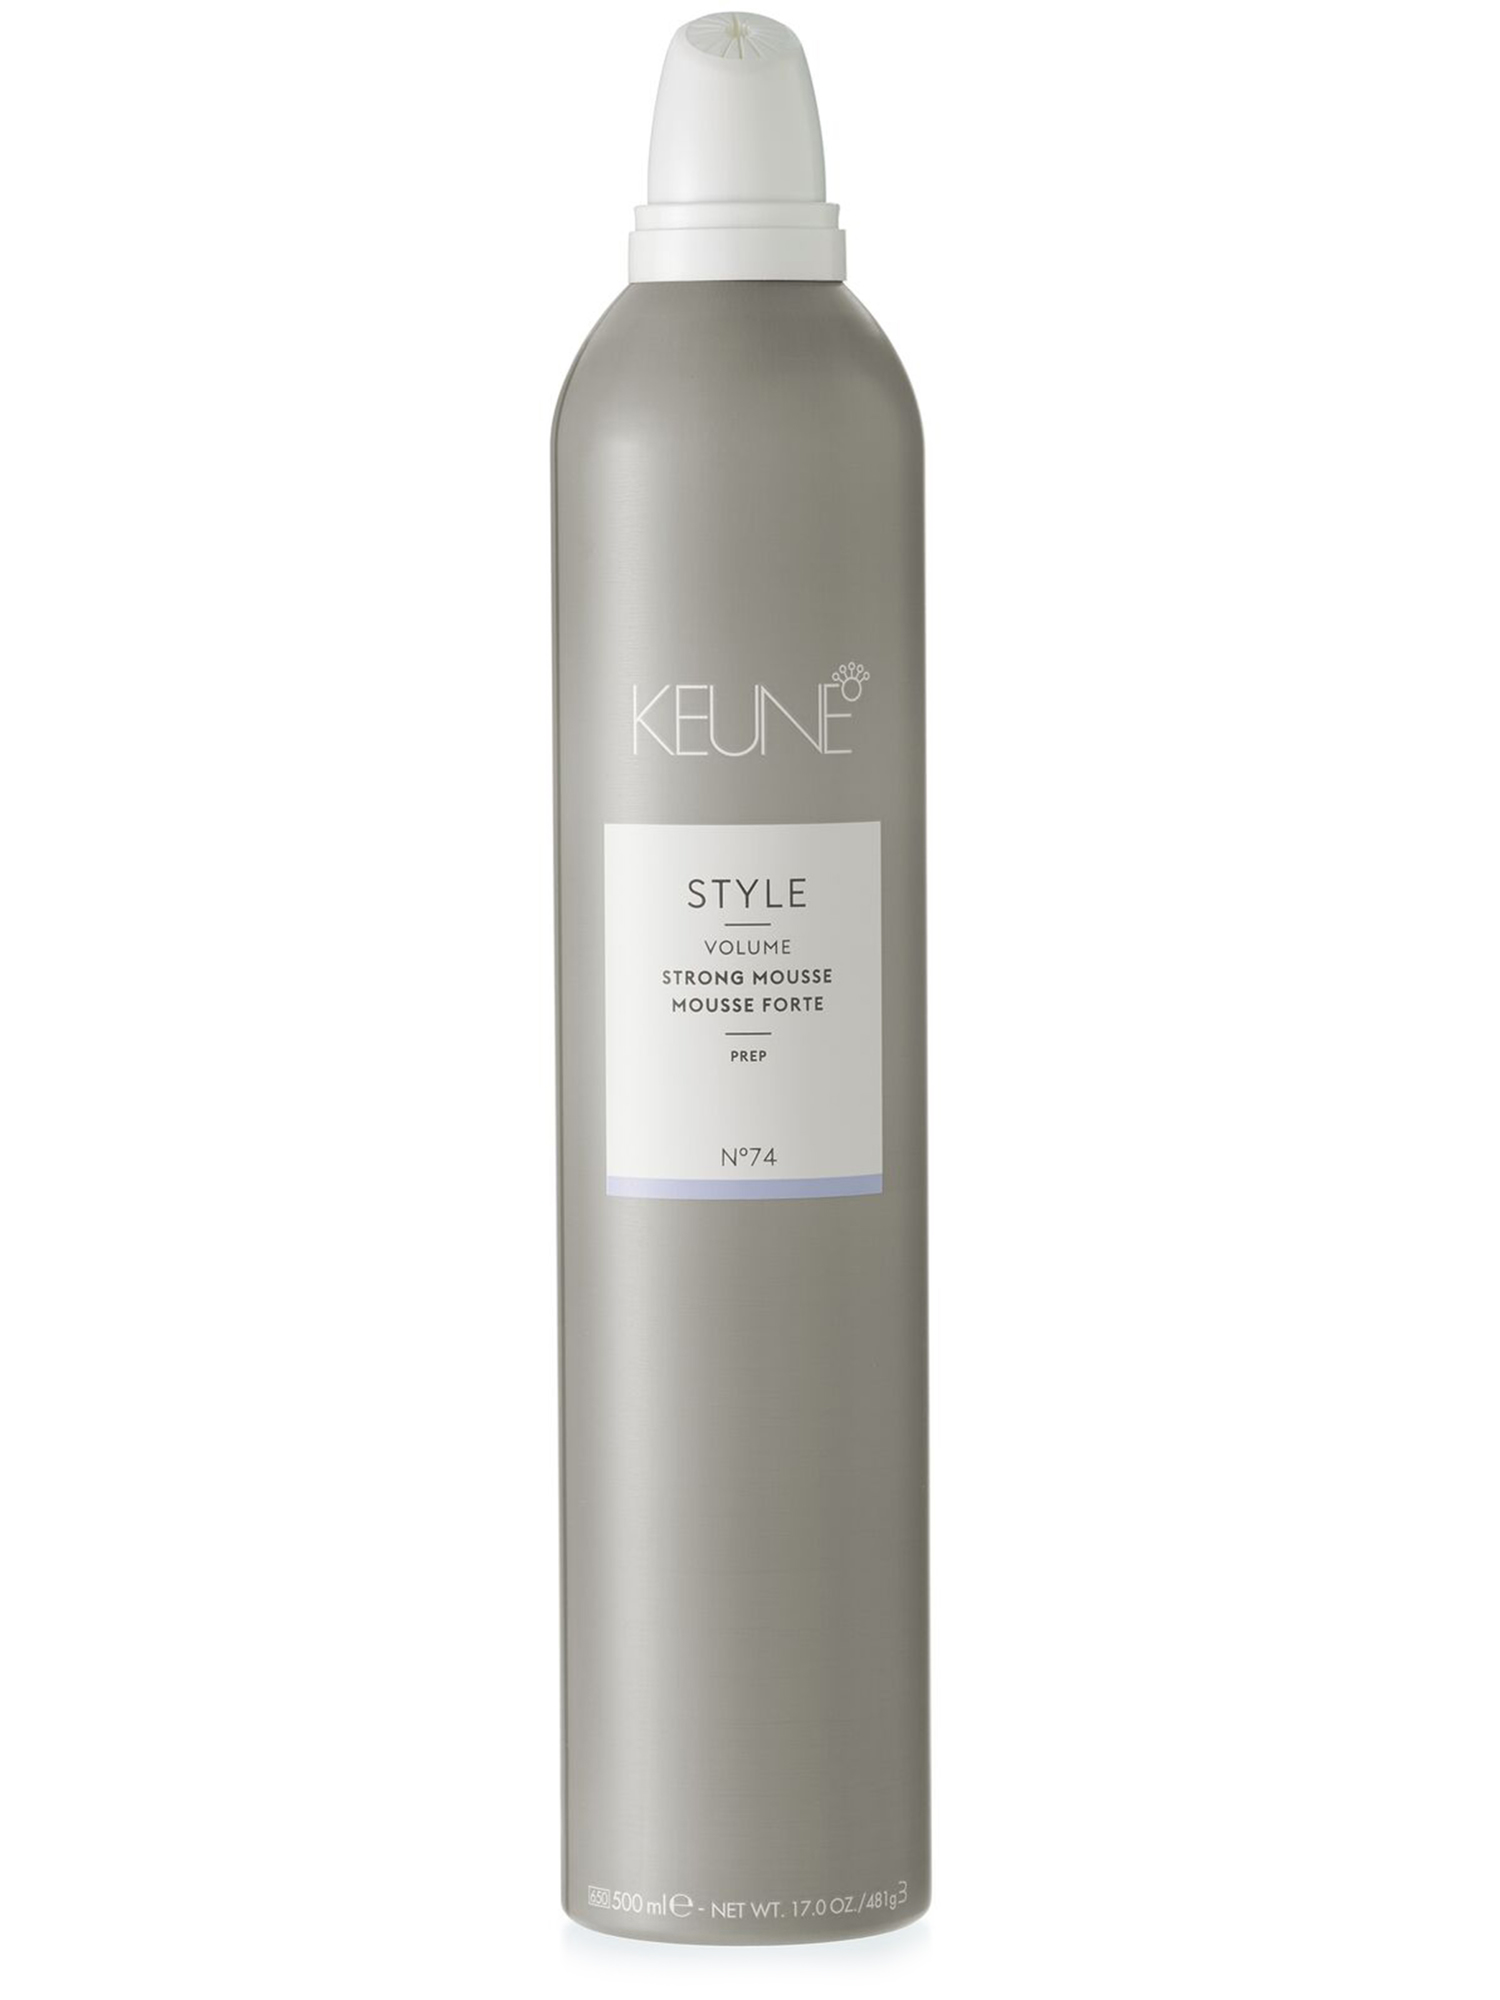 STYLE STRONG MOUSSE offers impressive hair styling and volume. With an intensity of 7, it provides strong hold and attractive shine. Discover hair mousse now on keune.ch.